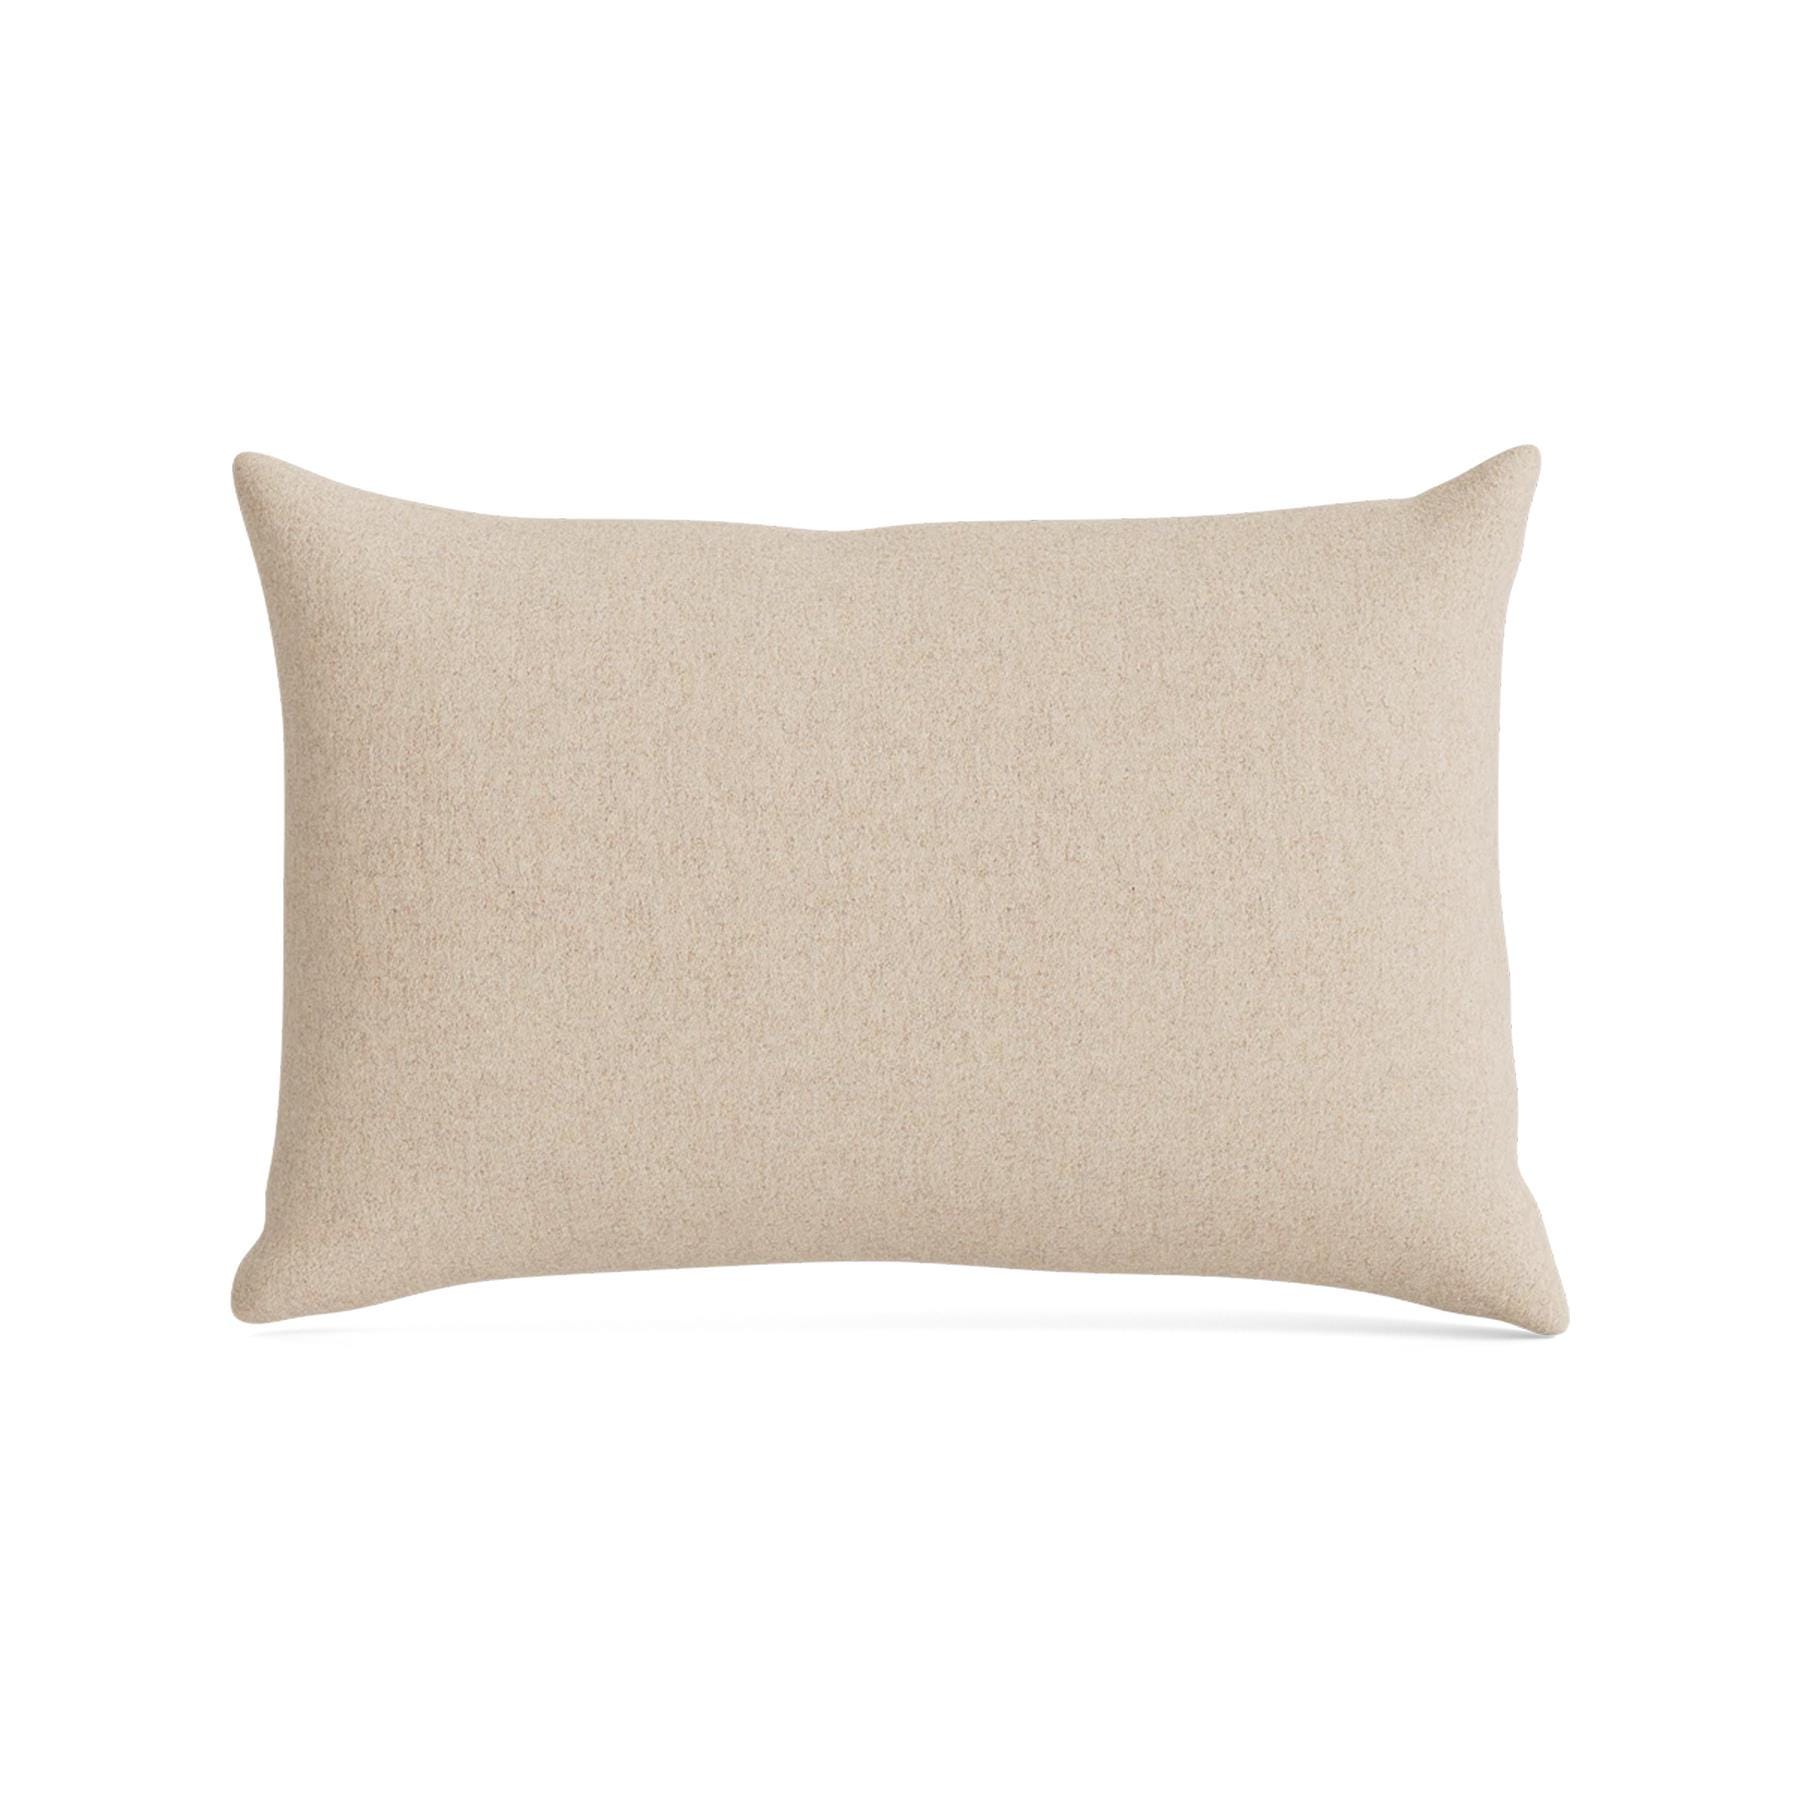 Make Nordic Pillow 40cmx60cm Wooly Sand 1037 Down And Fibers Cream